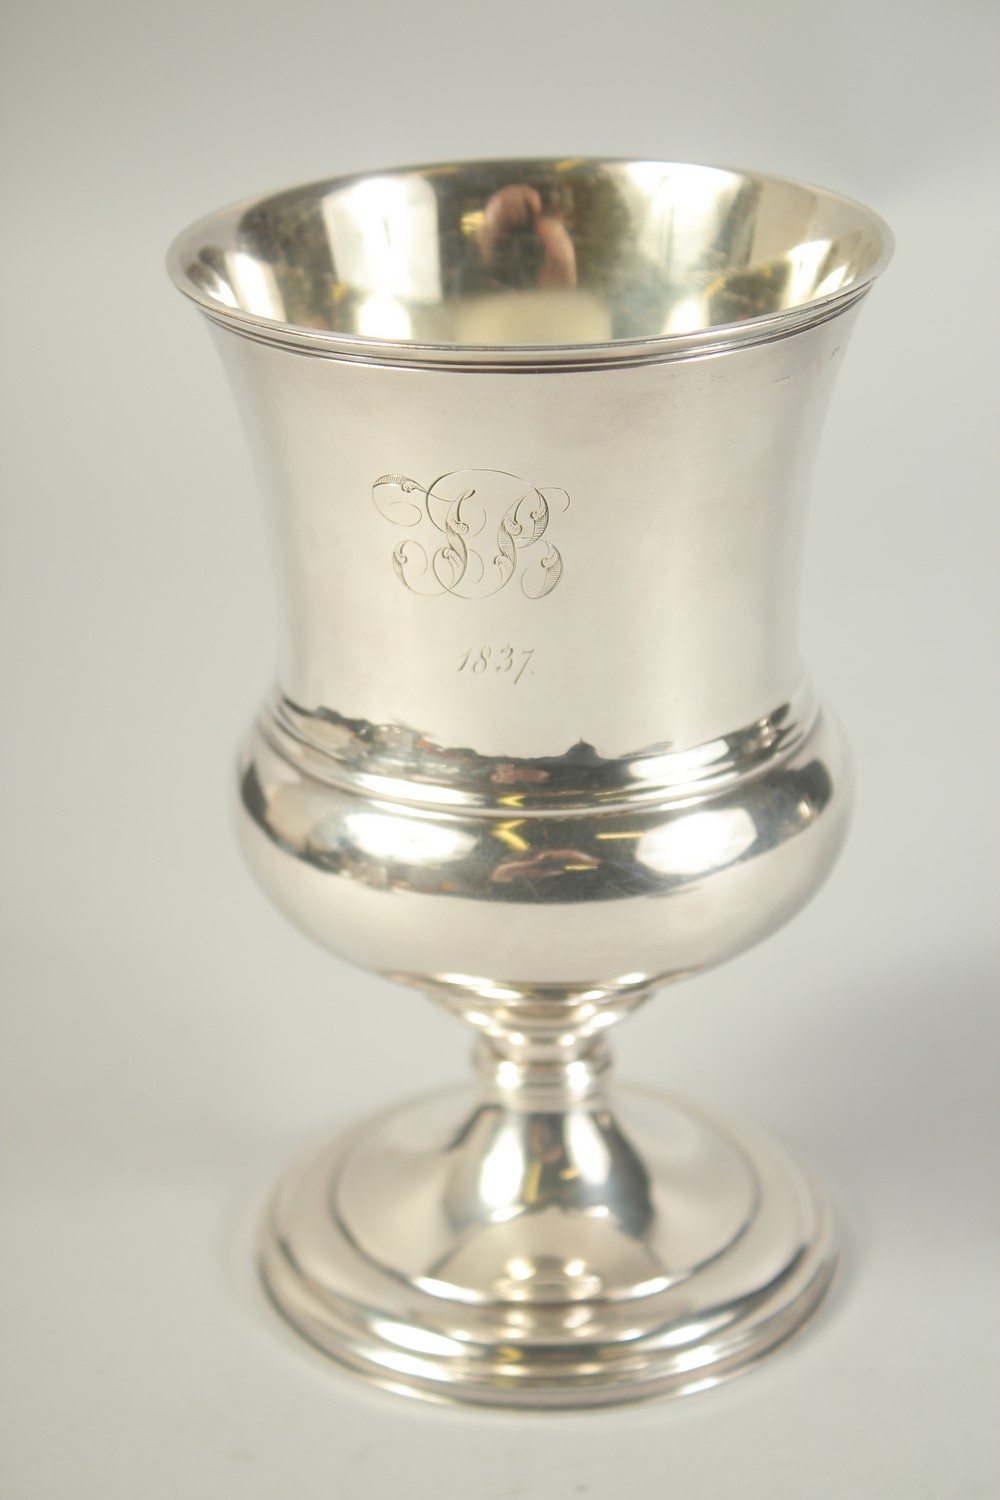 A GEORGE III SILVER HARE COURSING GOBLET. Edinburgh 1817.